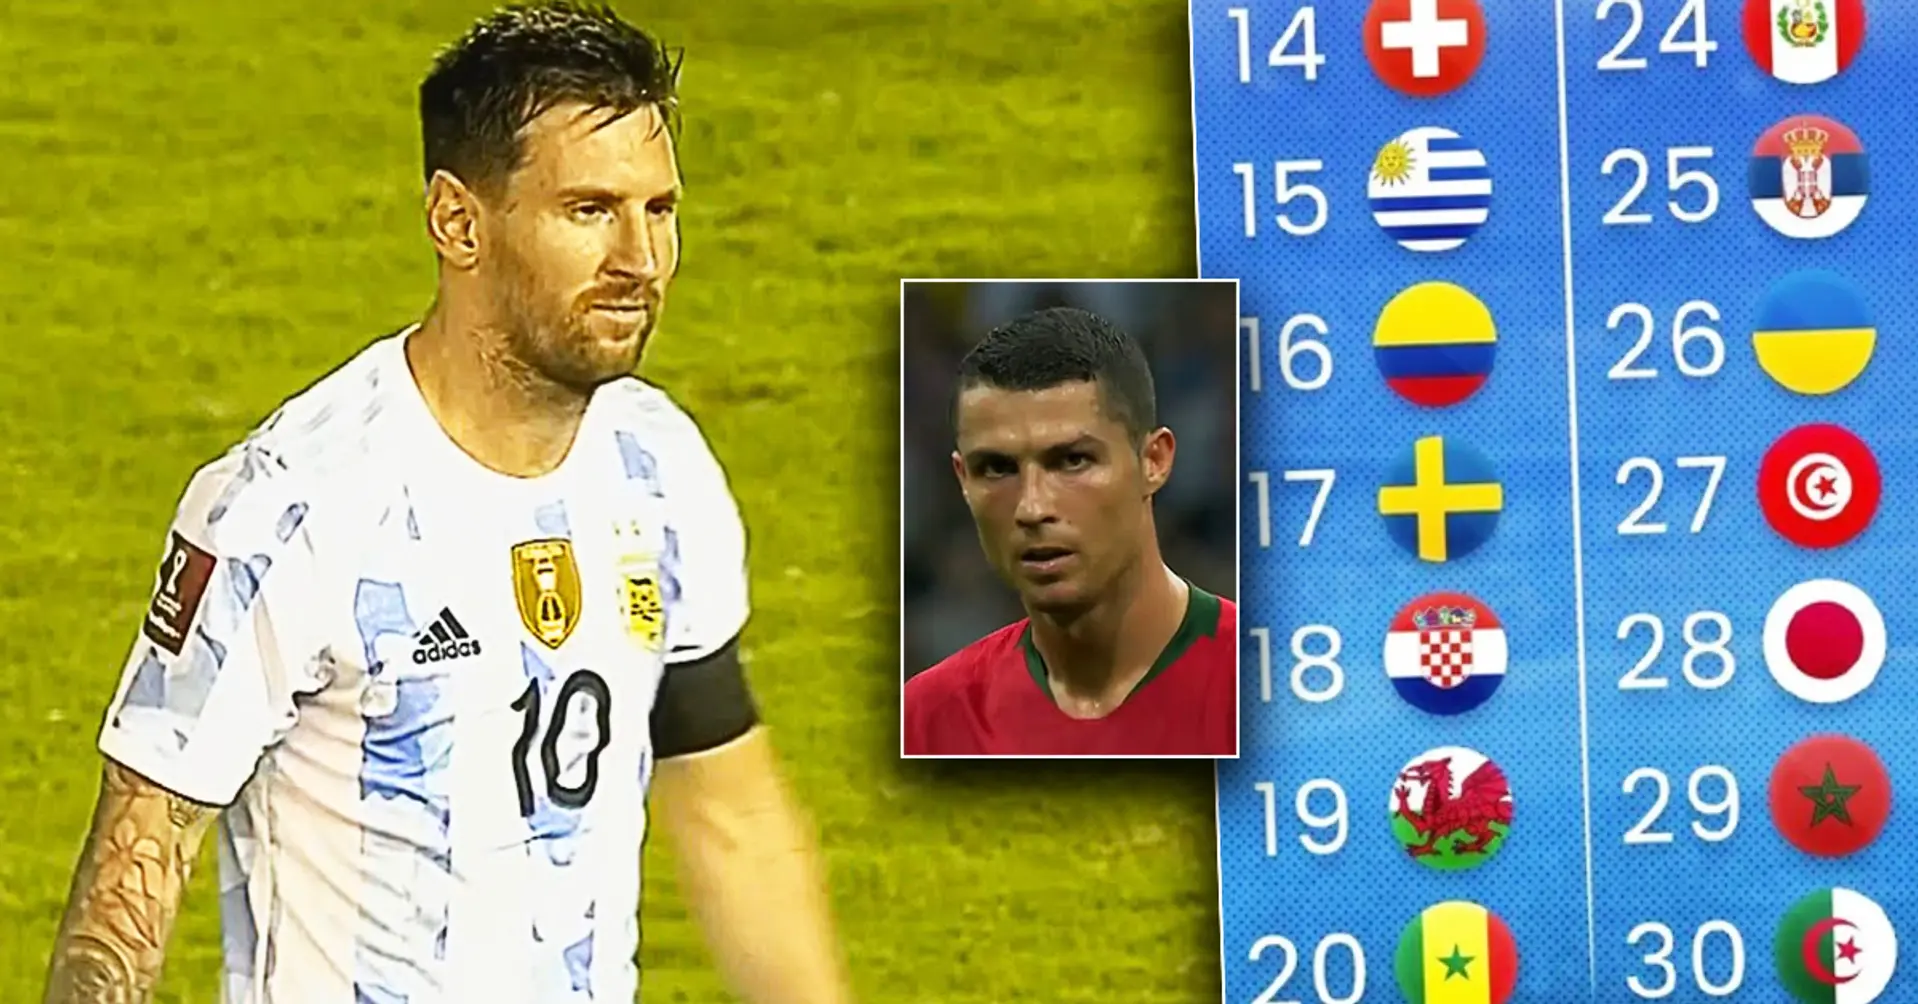 NEW: FIFA’s Top 40 national football teams in the world have been revealed